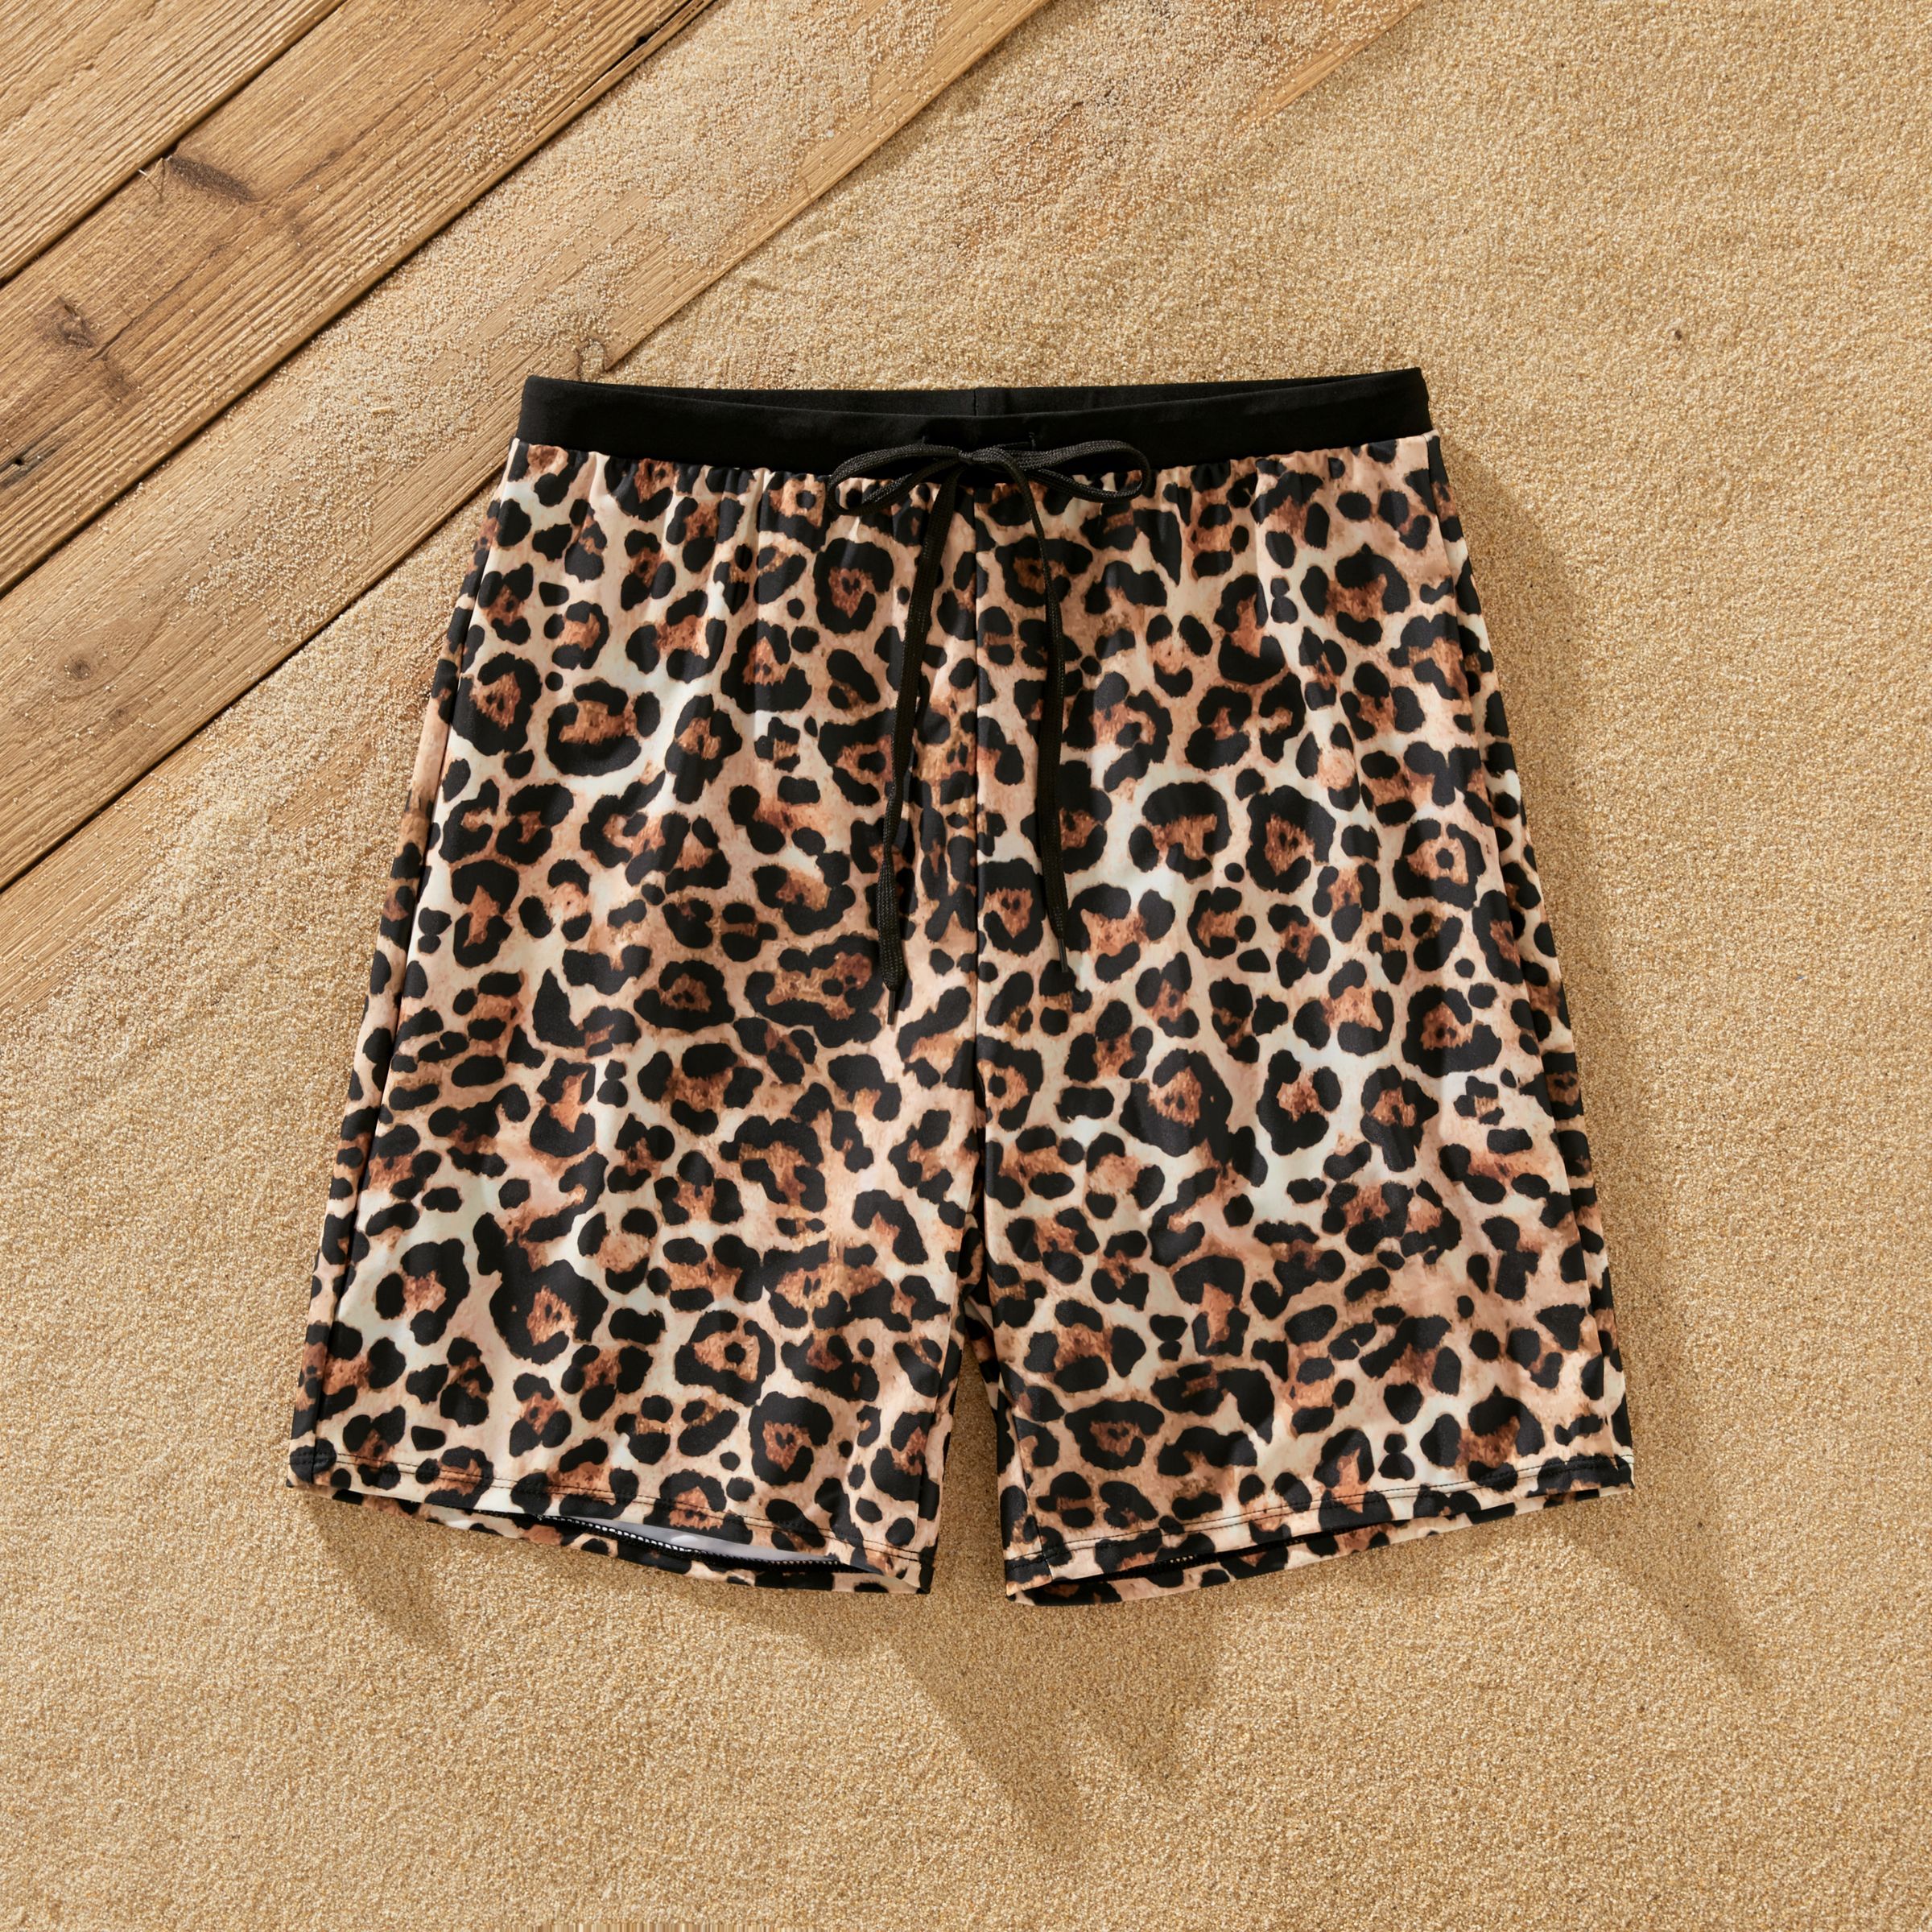 Family Matching Leopard Printed Swim Trunks Or One-Piece Cross Back Splicing Swimsuit